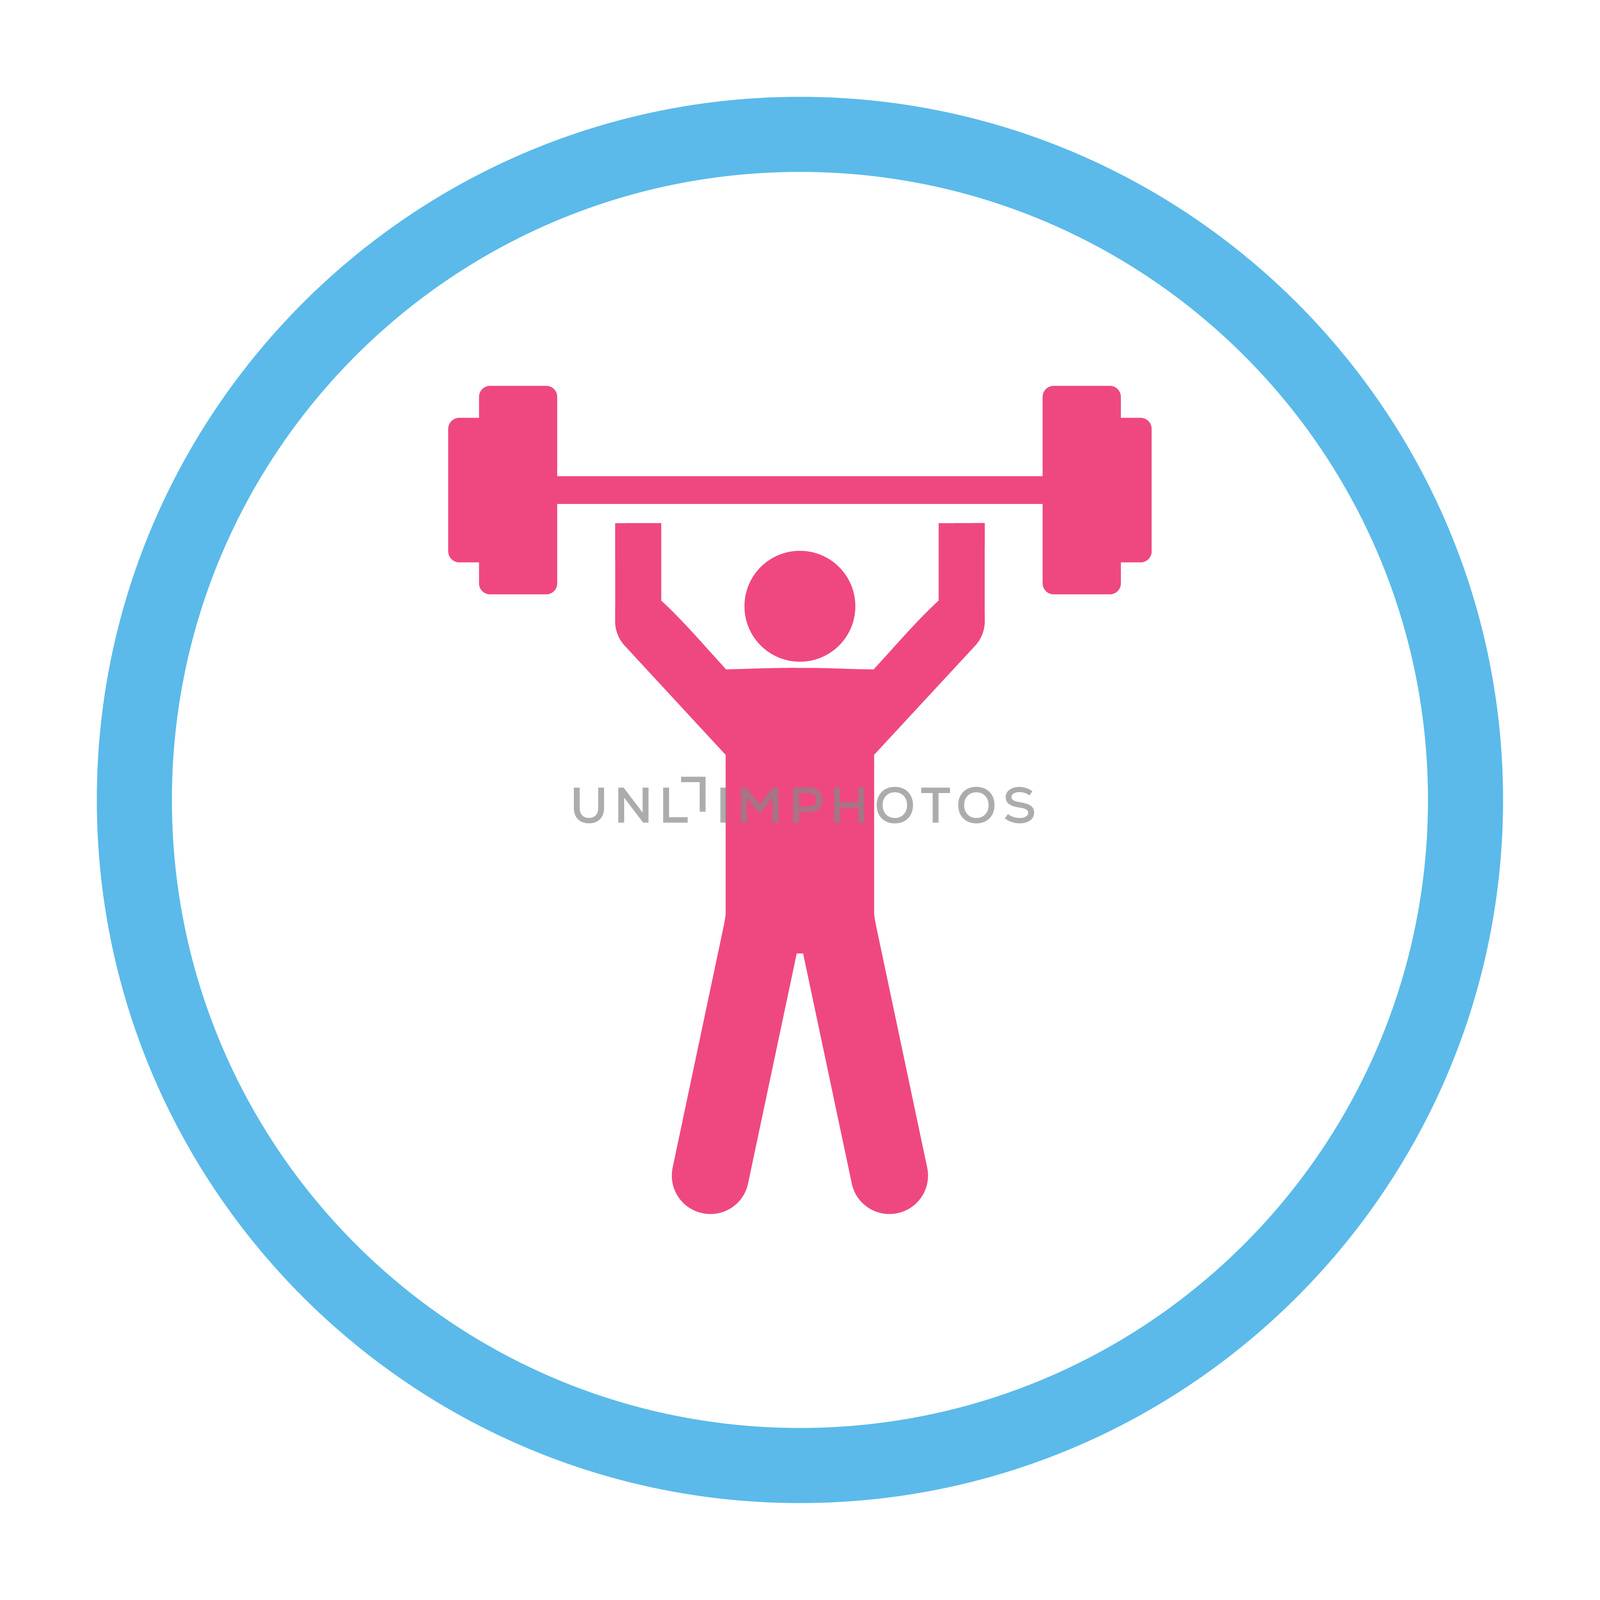 Power lifting glyph icon. This rounded flat symbol is drawn with pink and blue colors on a white background.